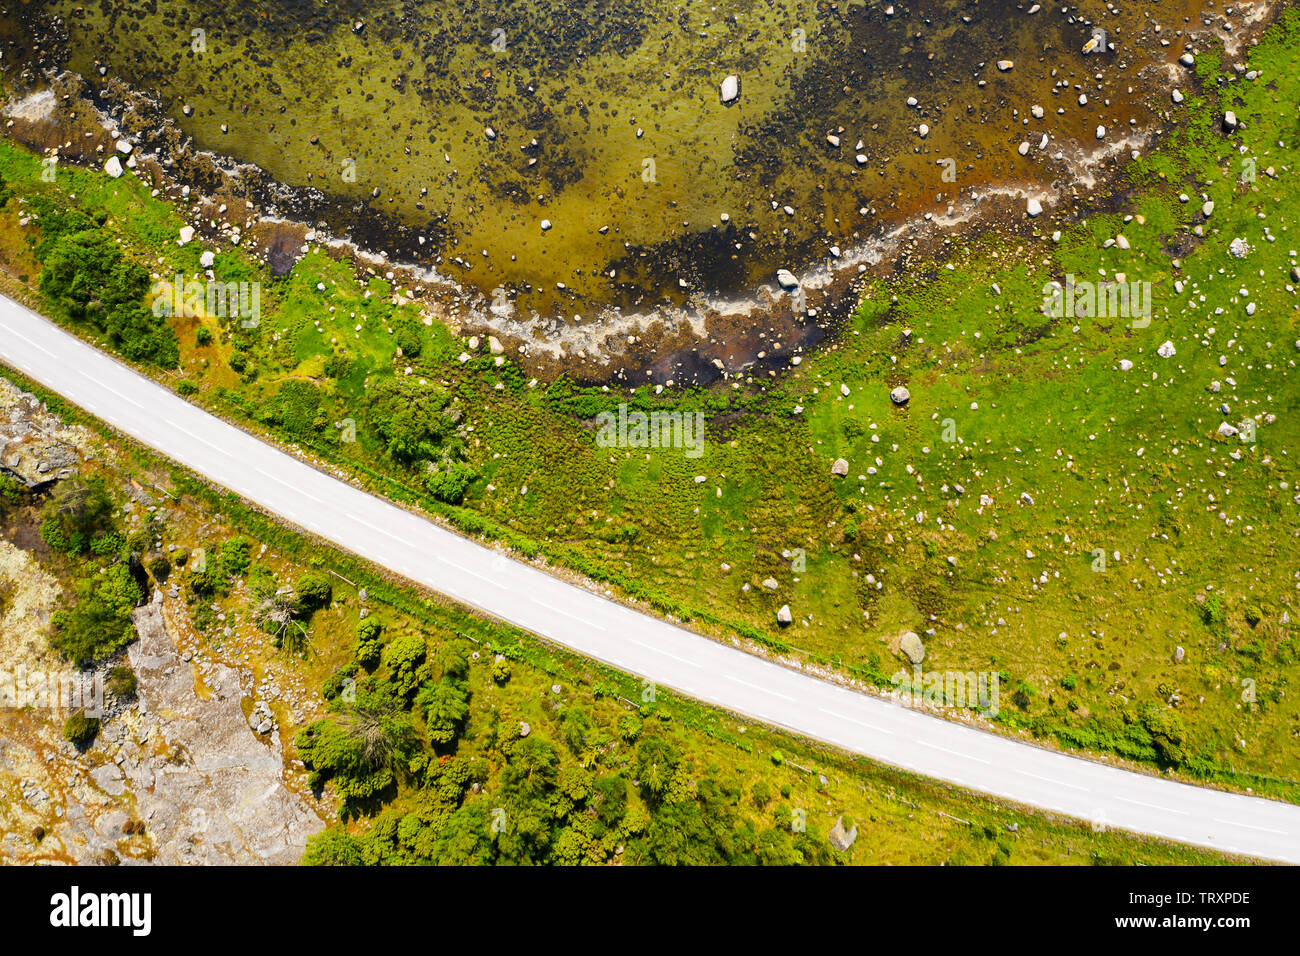 Top down aerial of island grass shoreline littered with boulders. A country road cuts through the landscape. Location Blekinge in Sweden. Stock Photo